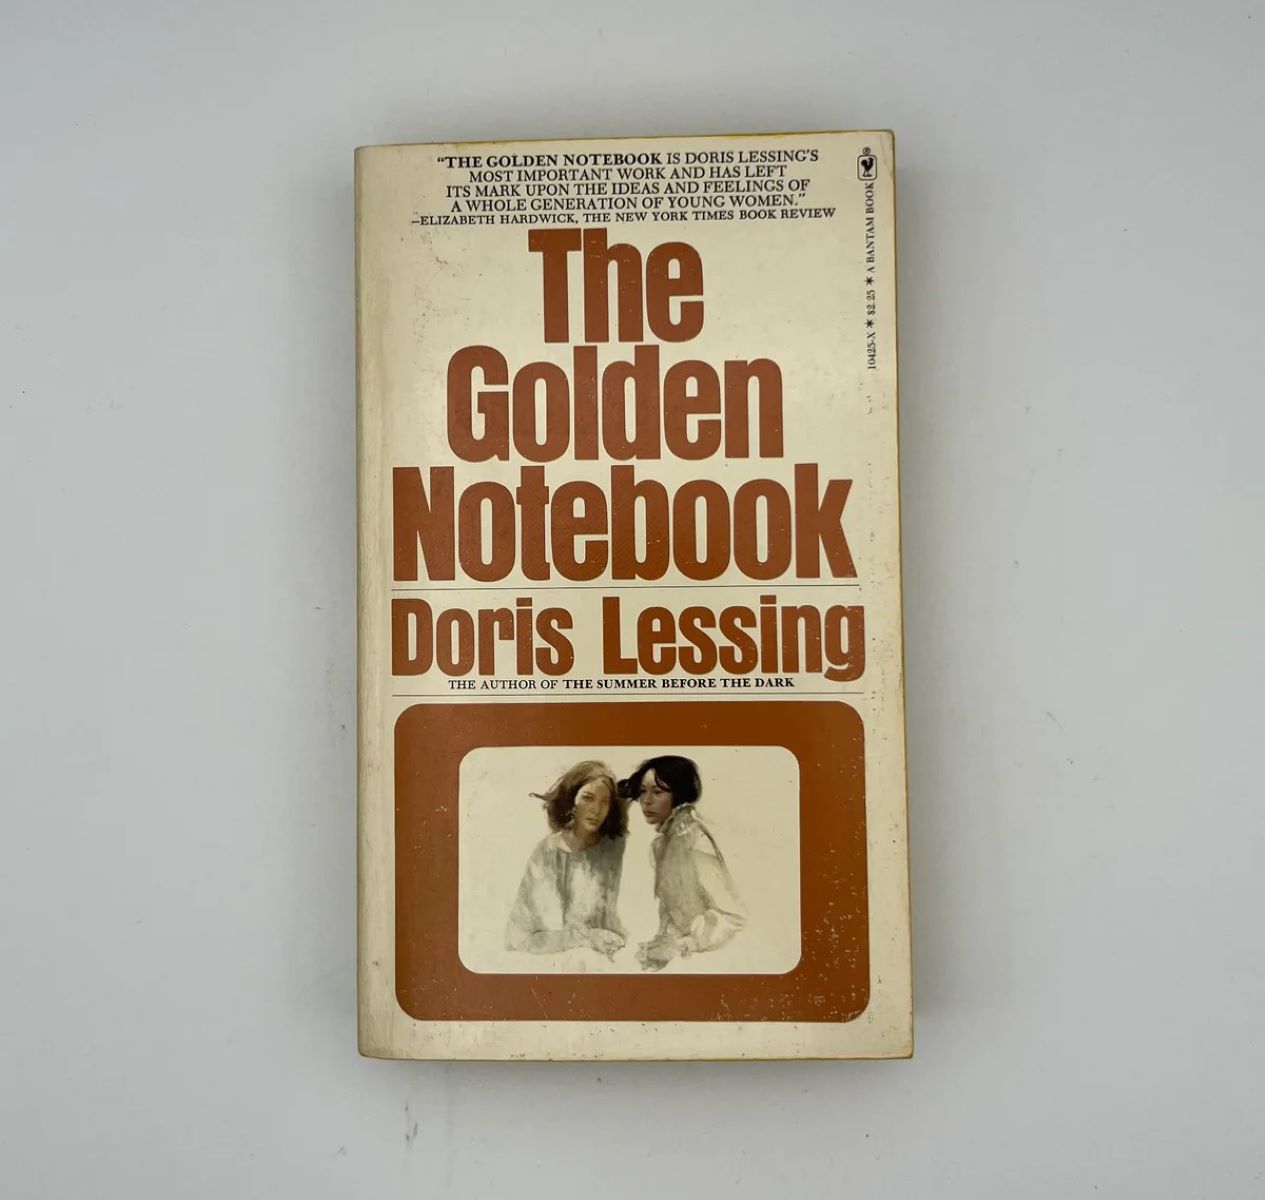 14-mind-blowing-facts-about-the-golden-notebook-doris-lessing